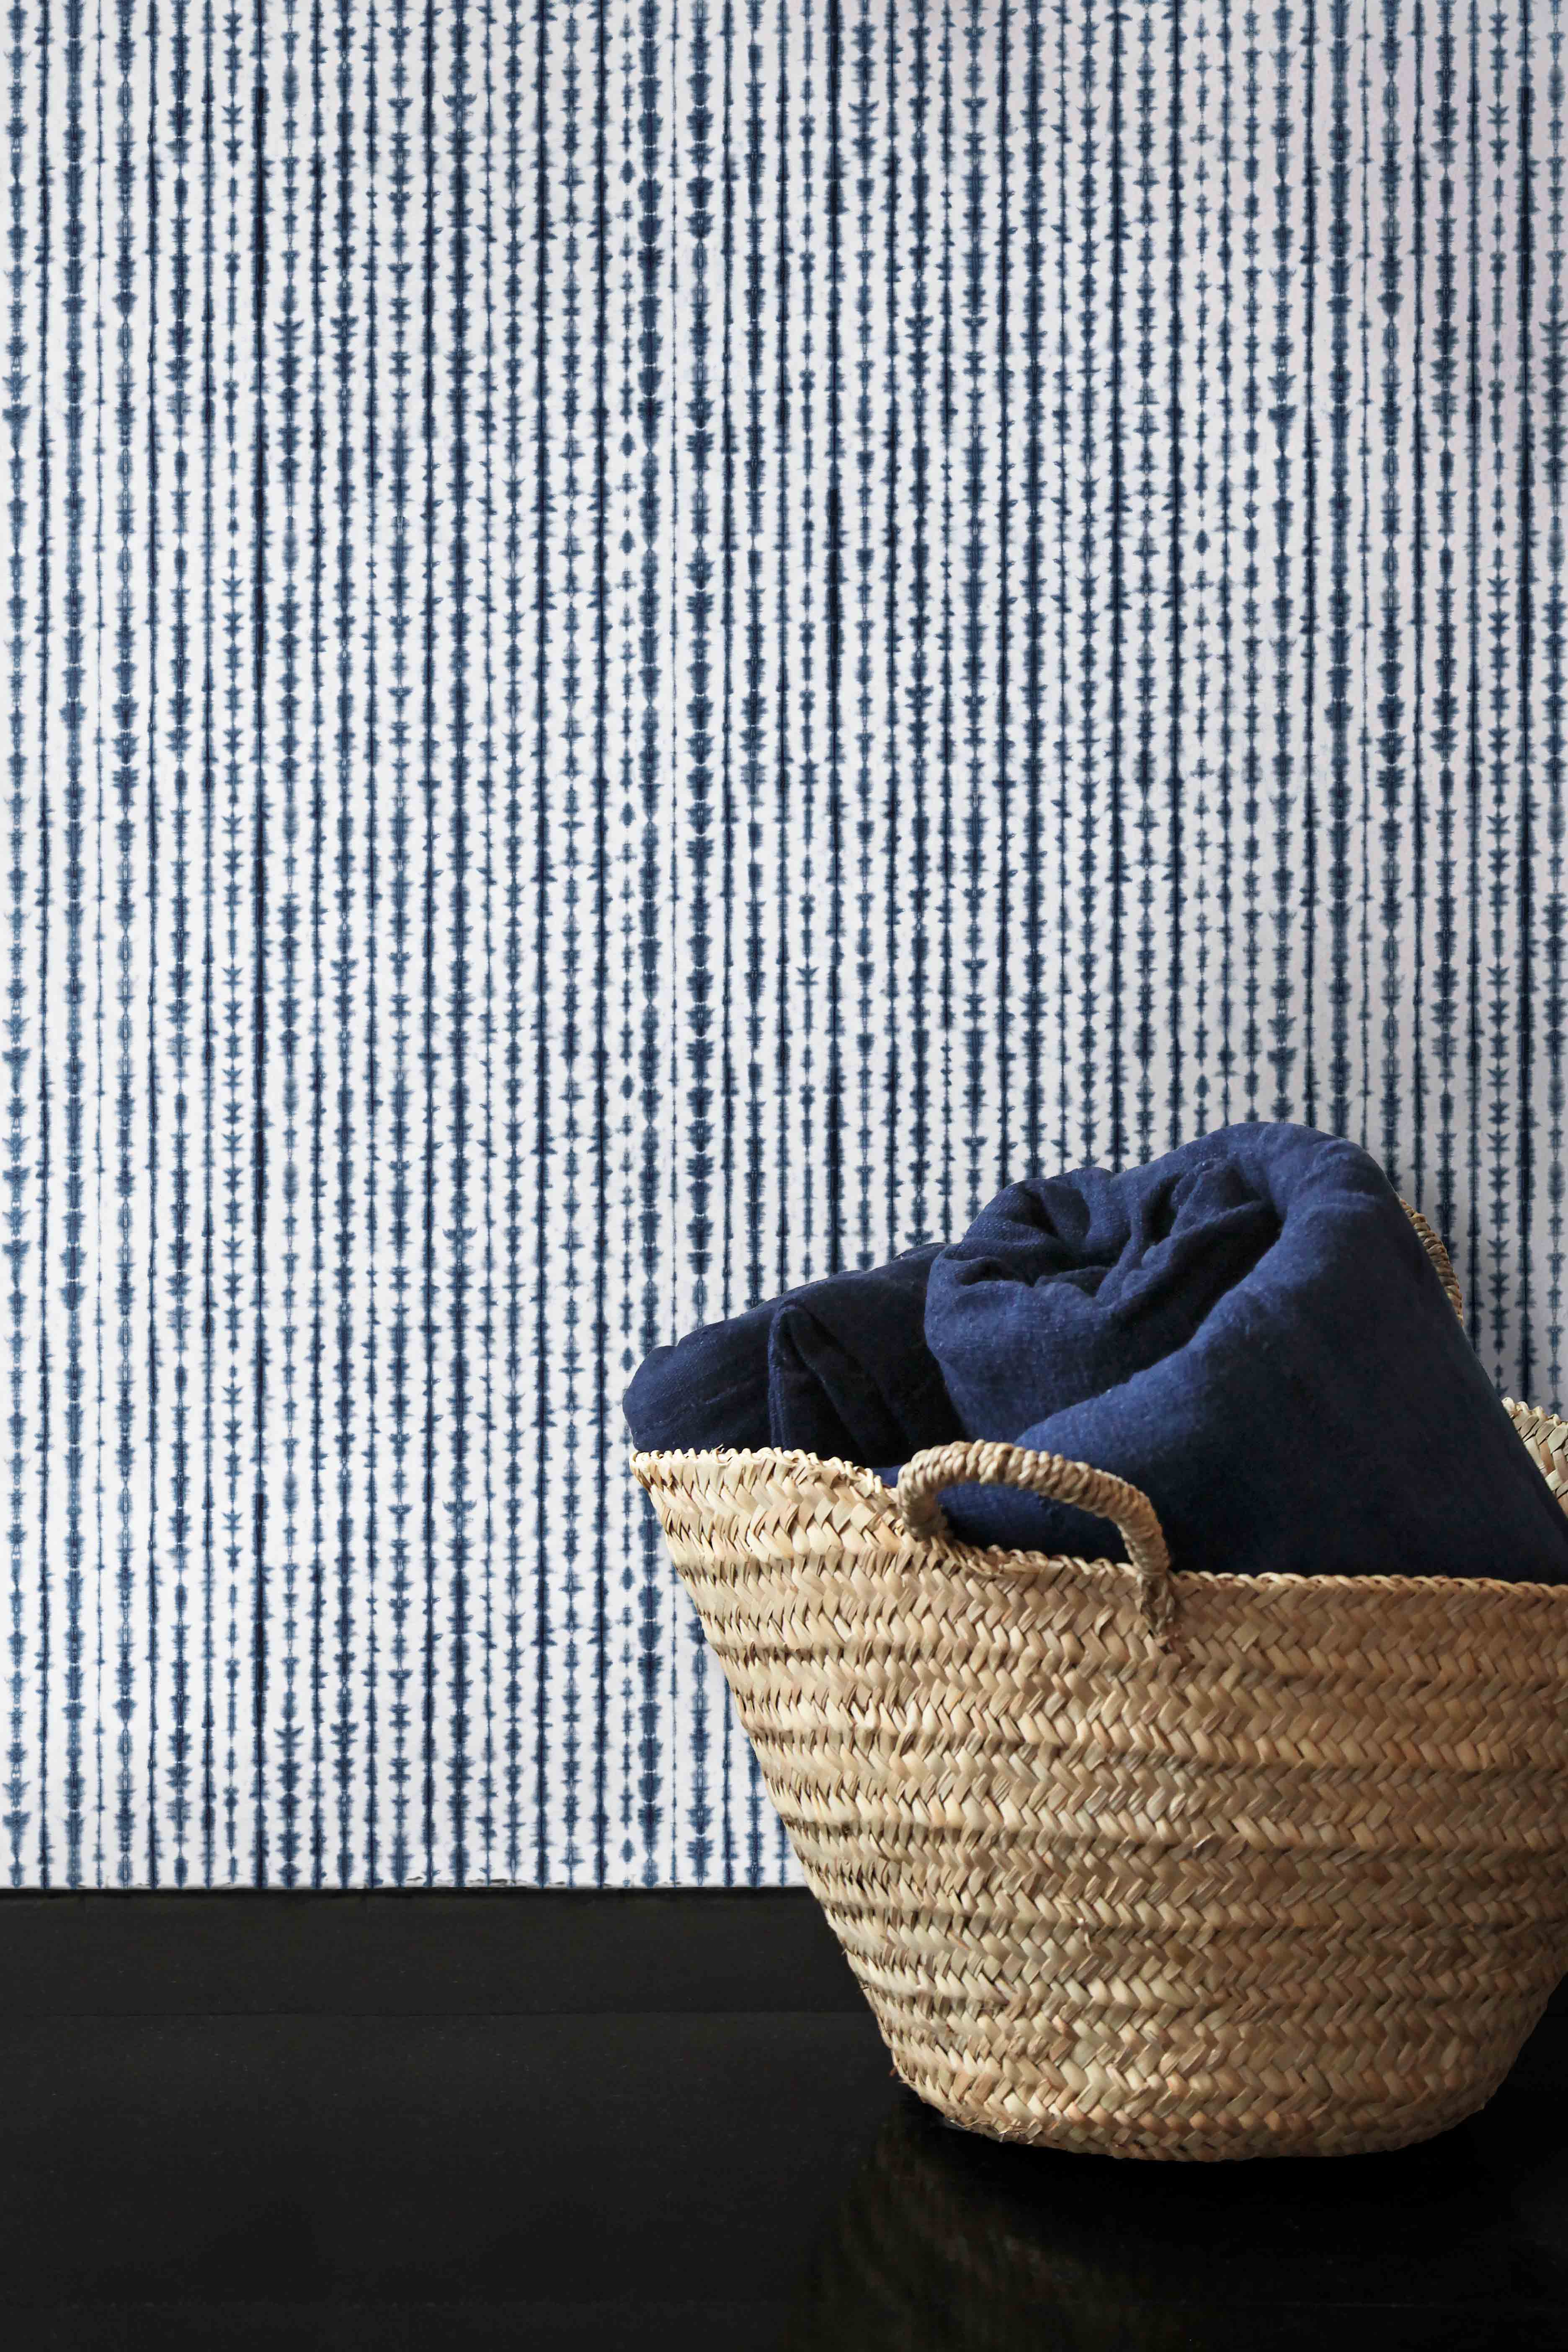 blue indigo wallpaper with patterns inspired by traditional indigo dying.